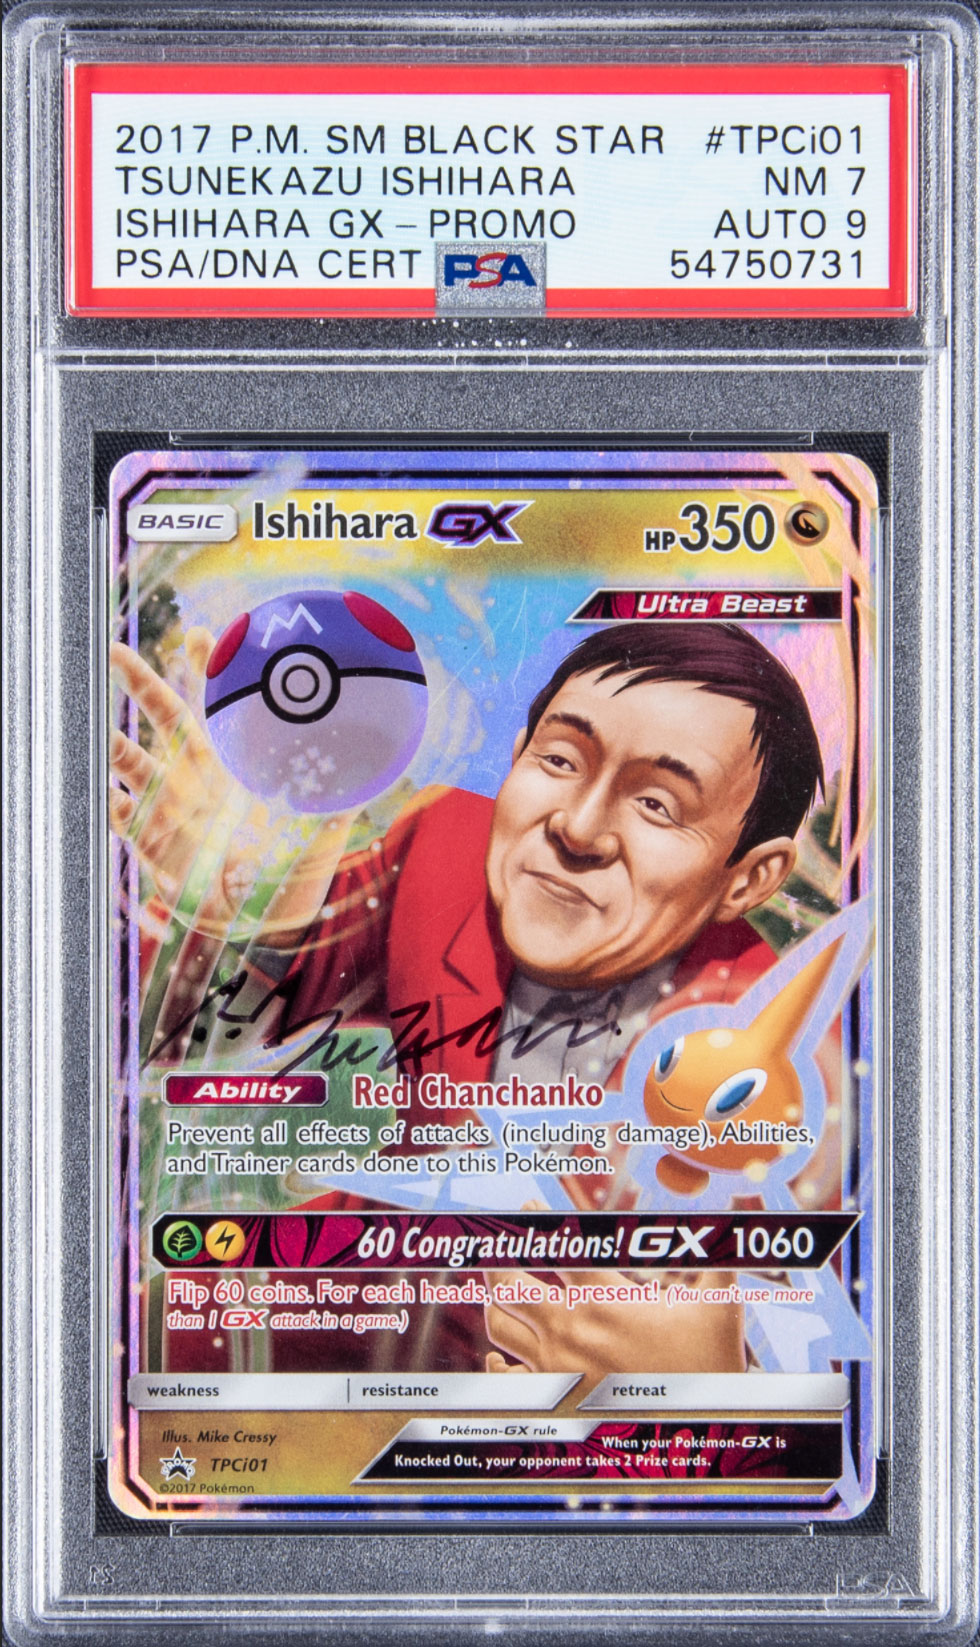 Signed Pokémon Card Sells For $320,000